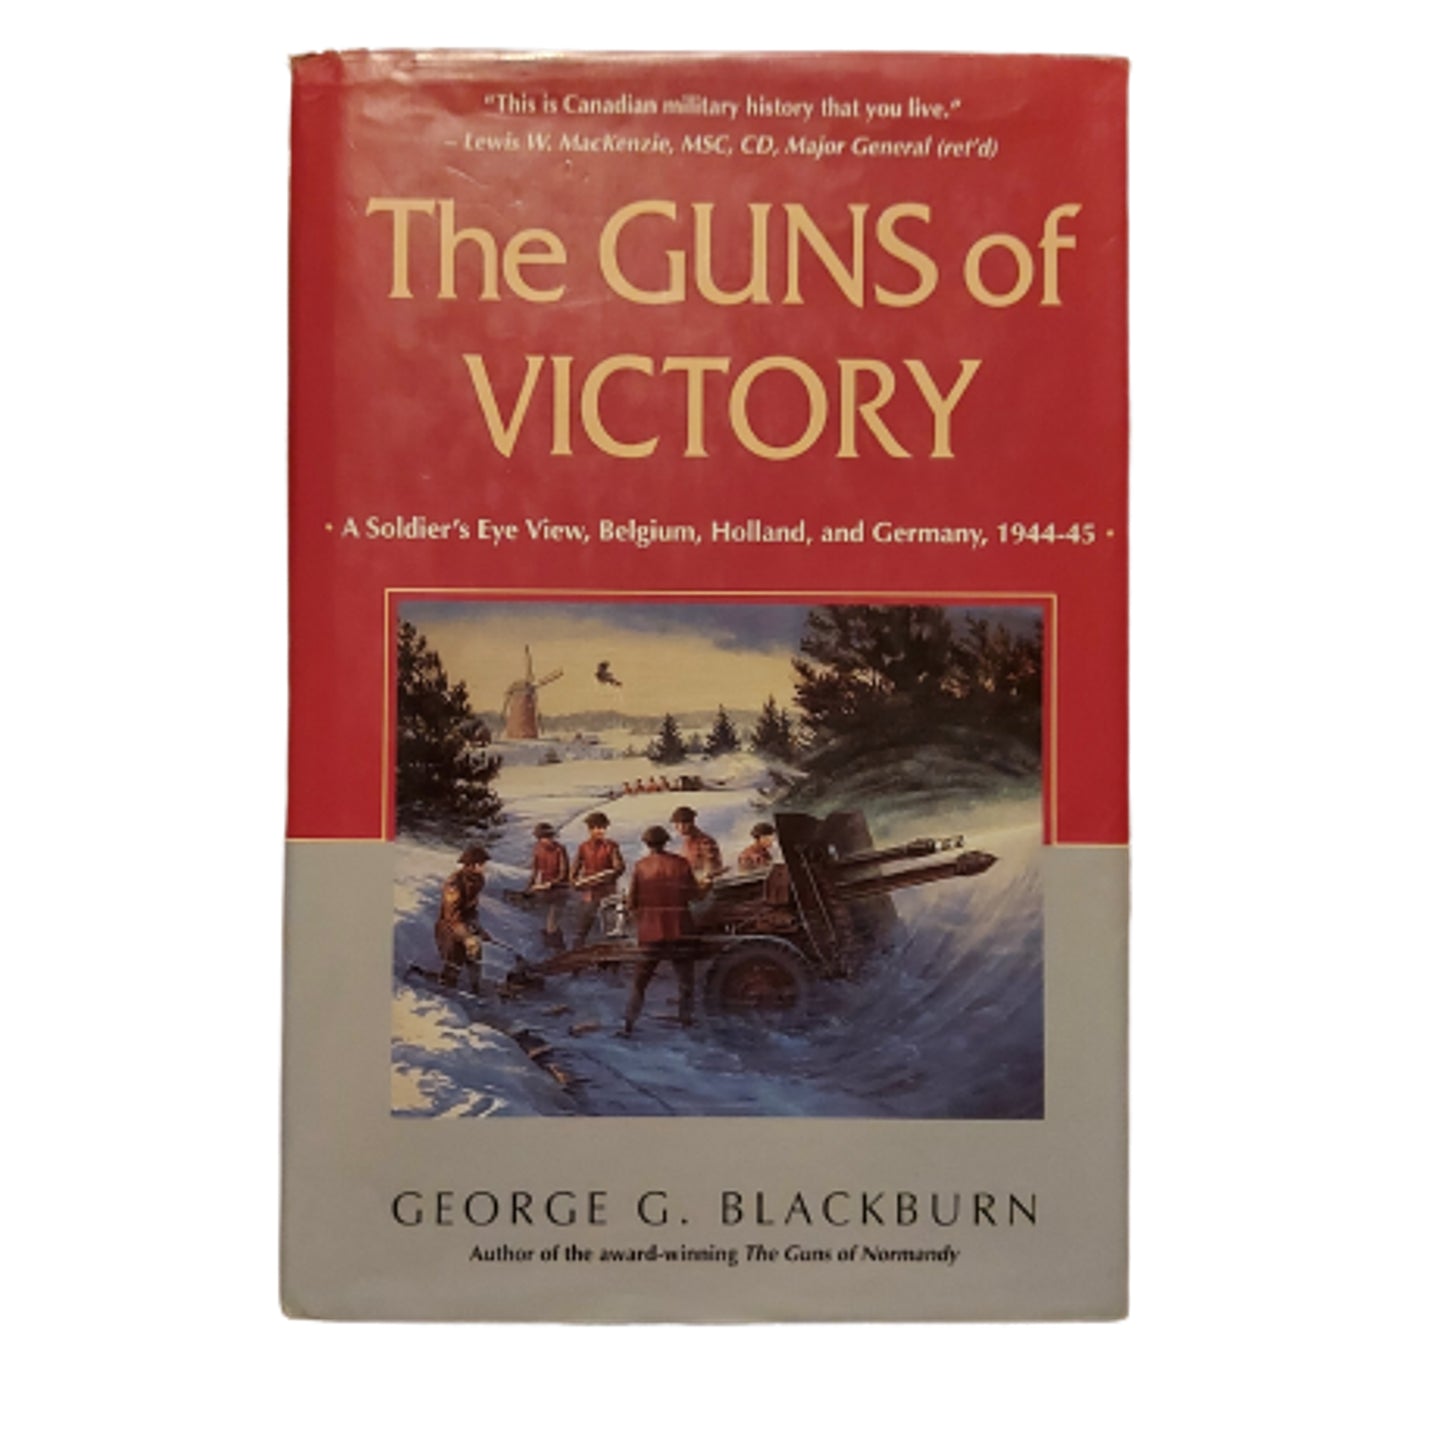 The Guns Of Victory - A Soldier's Eye View, Belgium, Holland, and Germany 1944-45